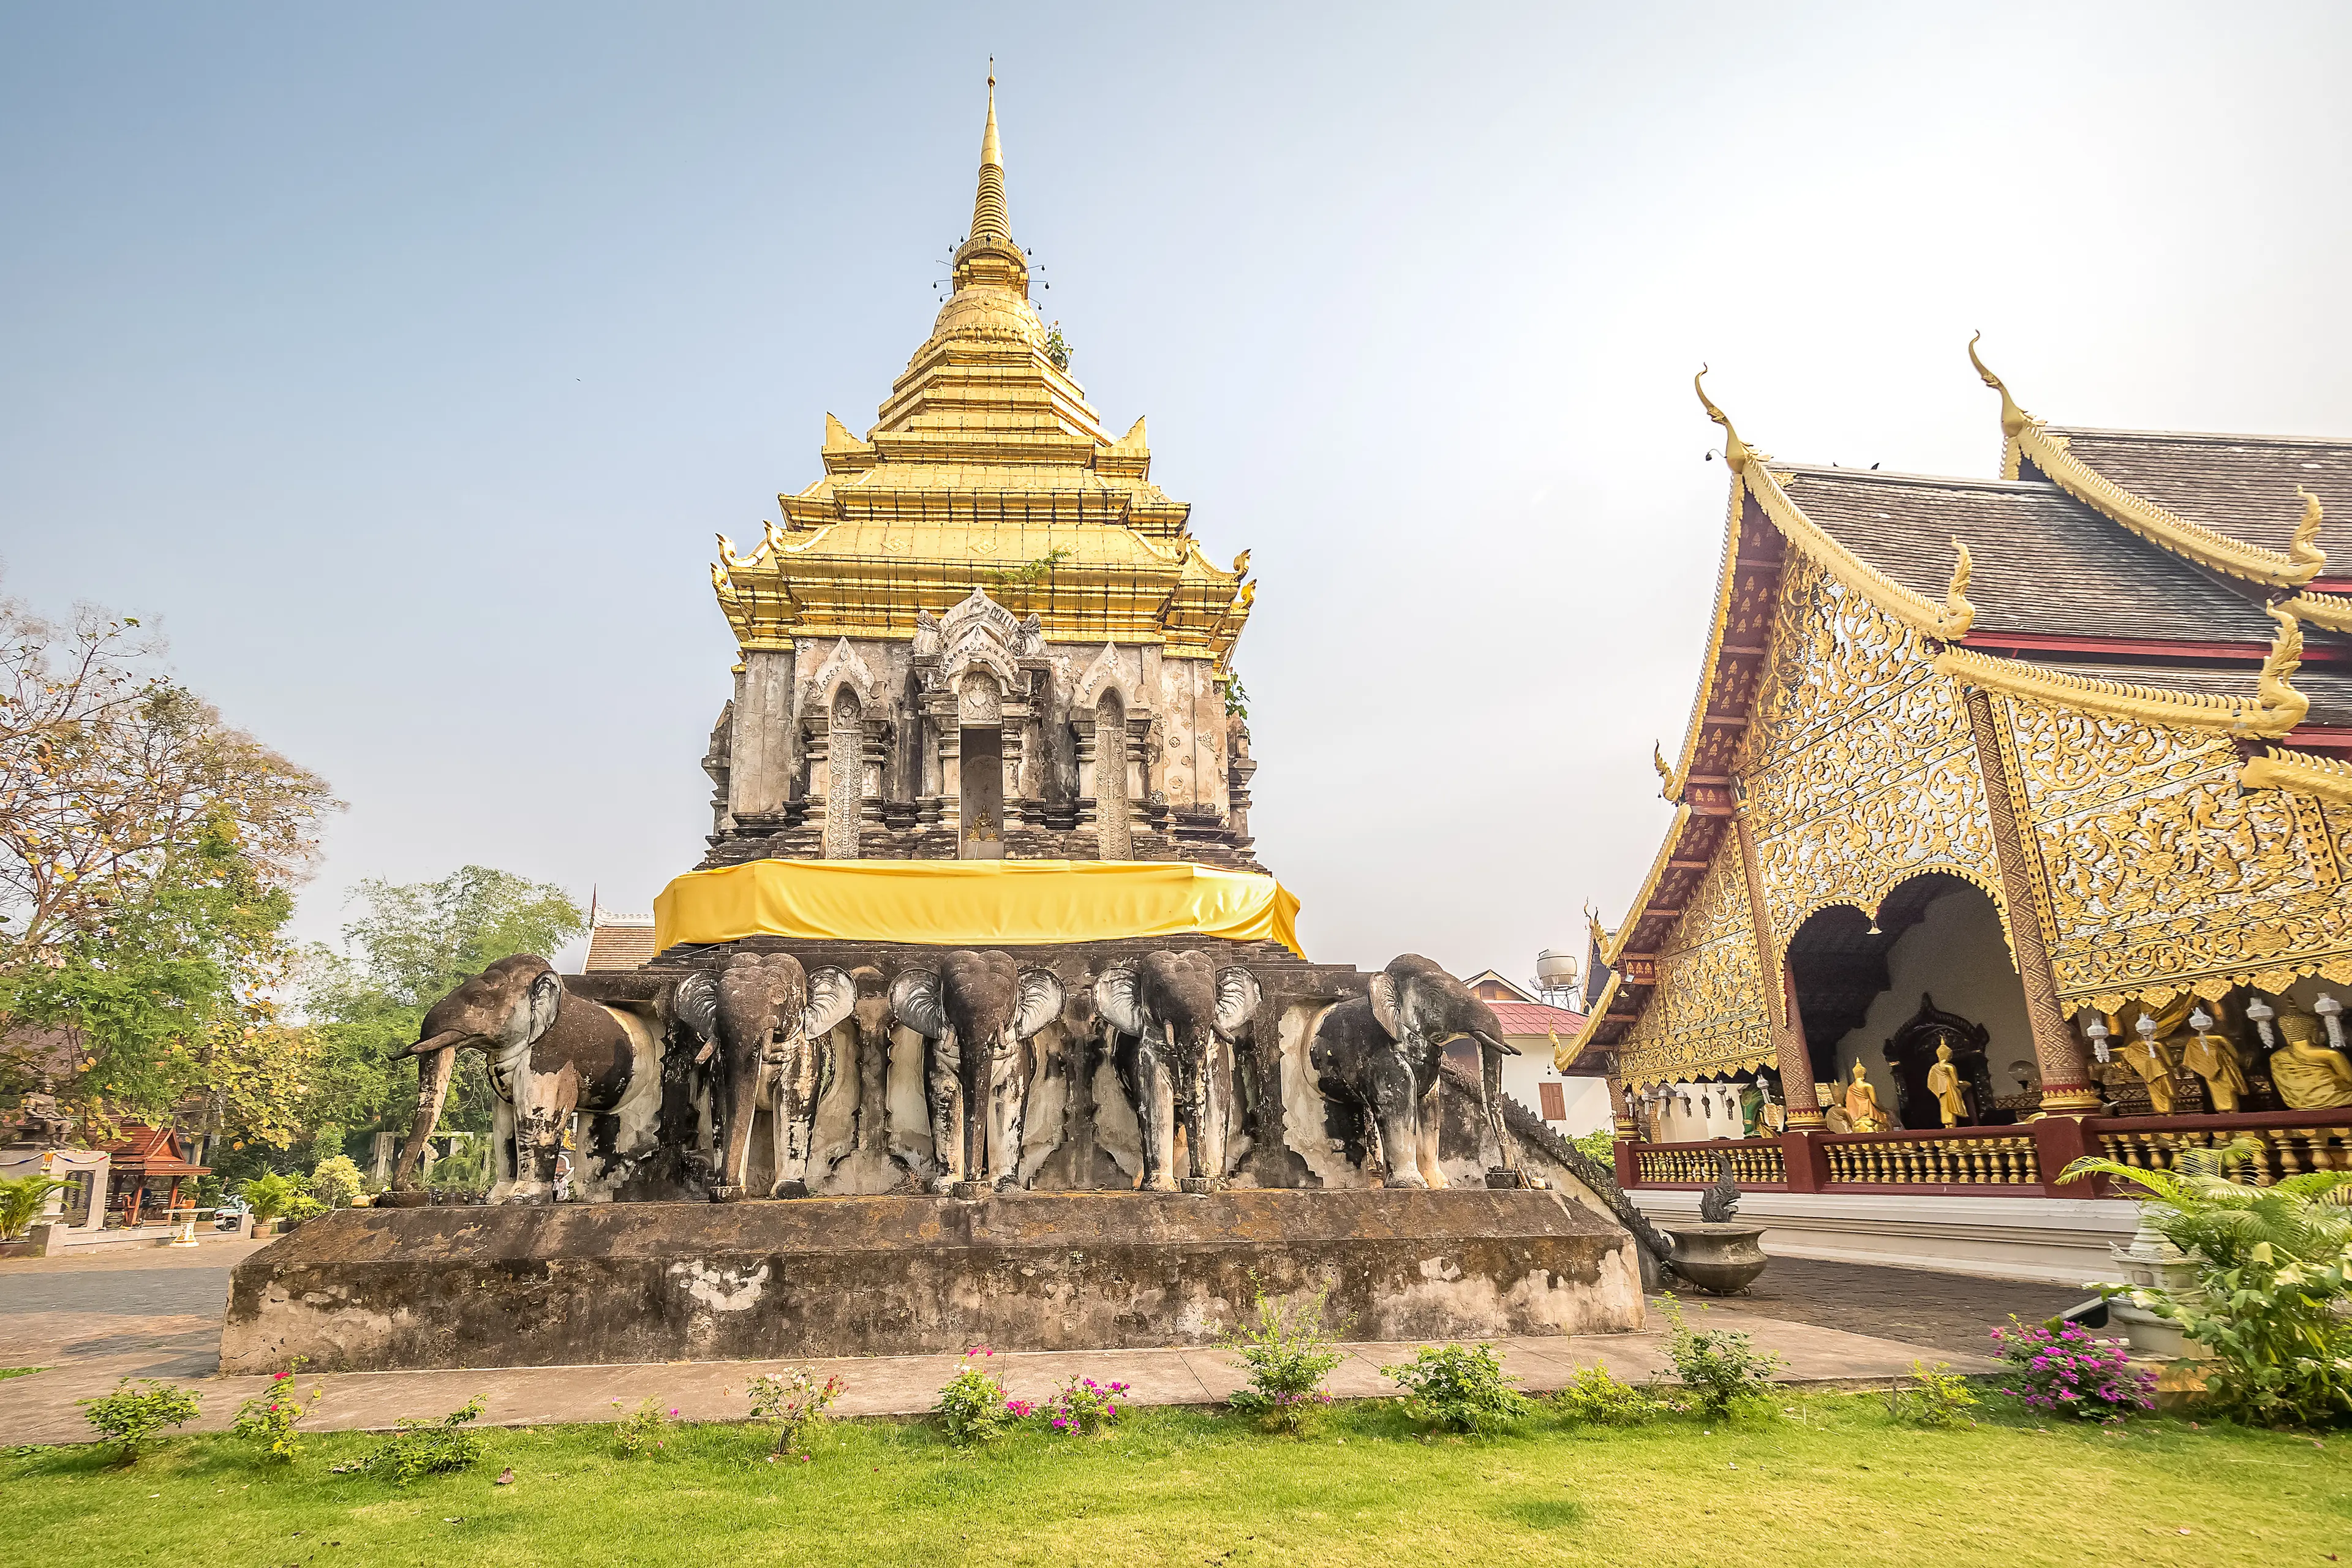 Wat Chiang Man, the oldest temple